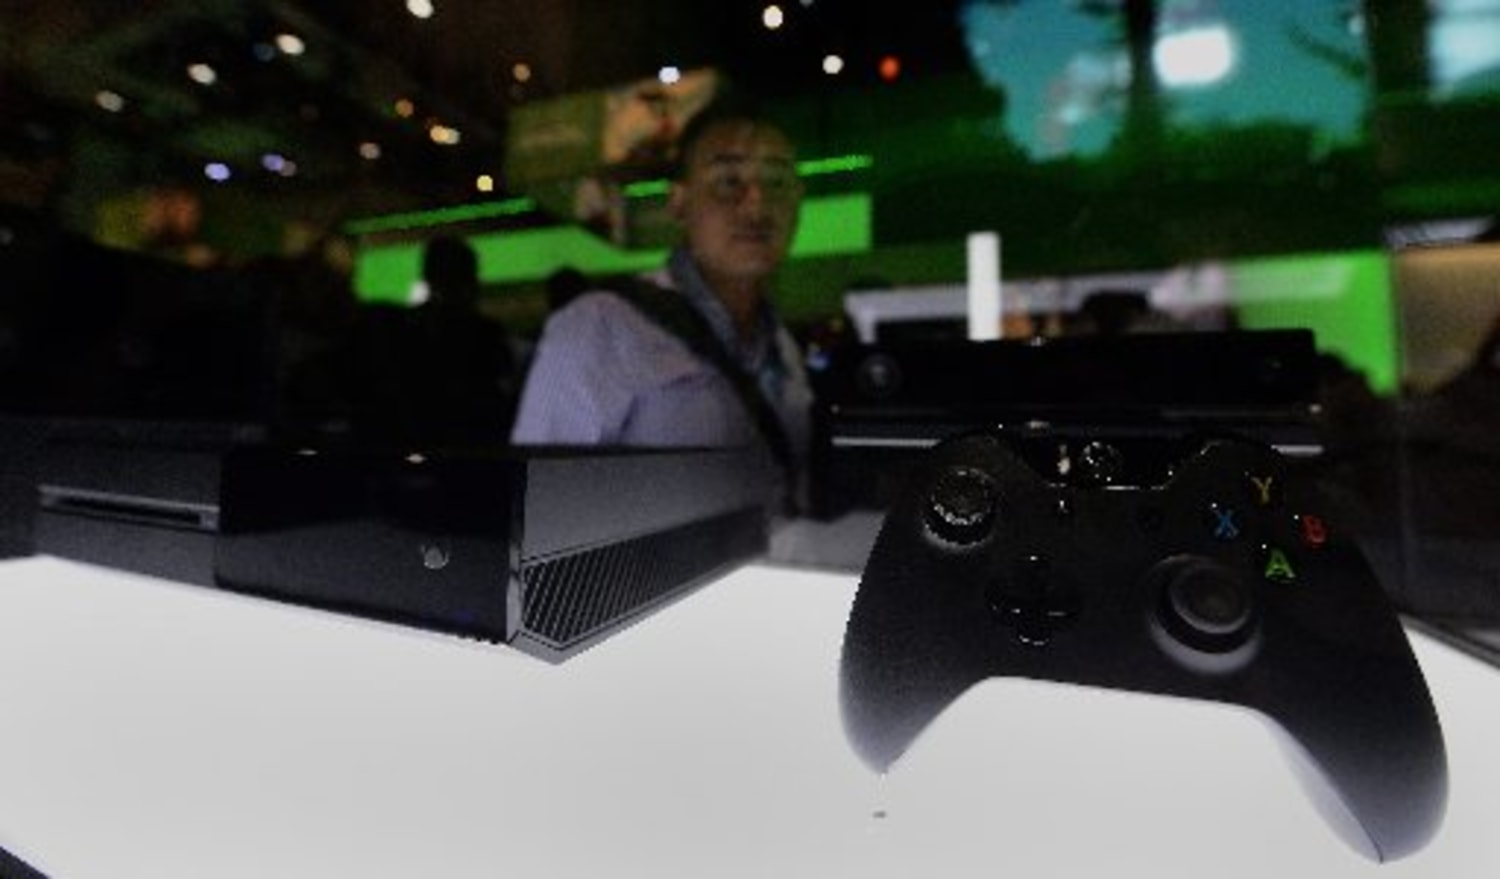 Connect a Kinect sensor to an Xbox One S or Xbox One X console